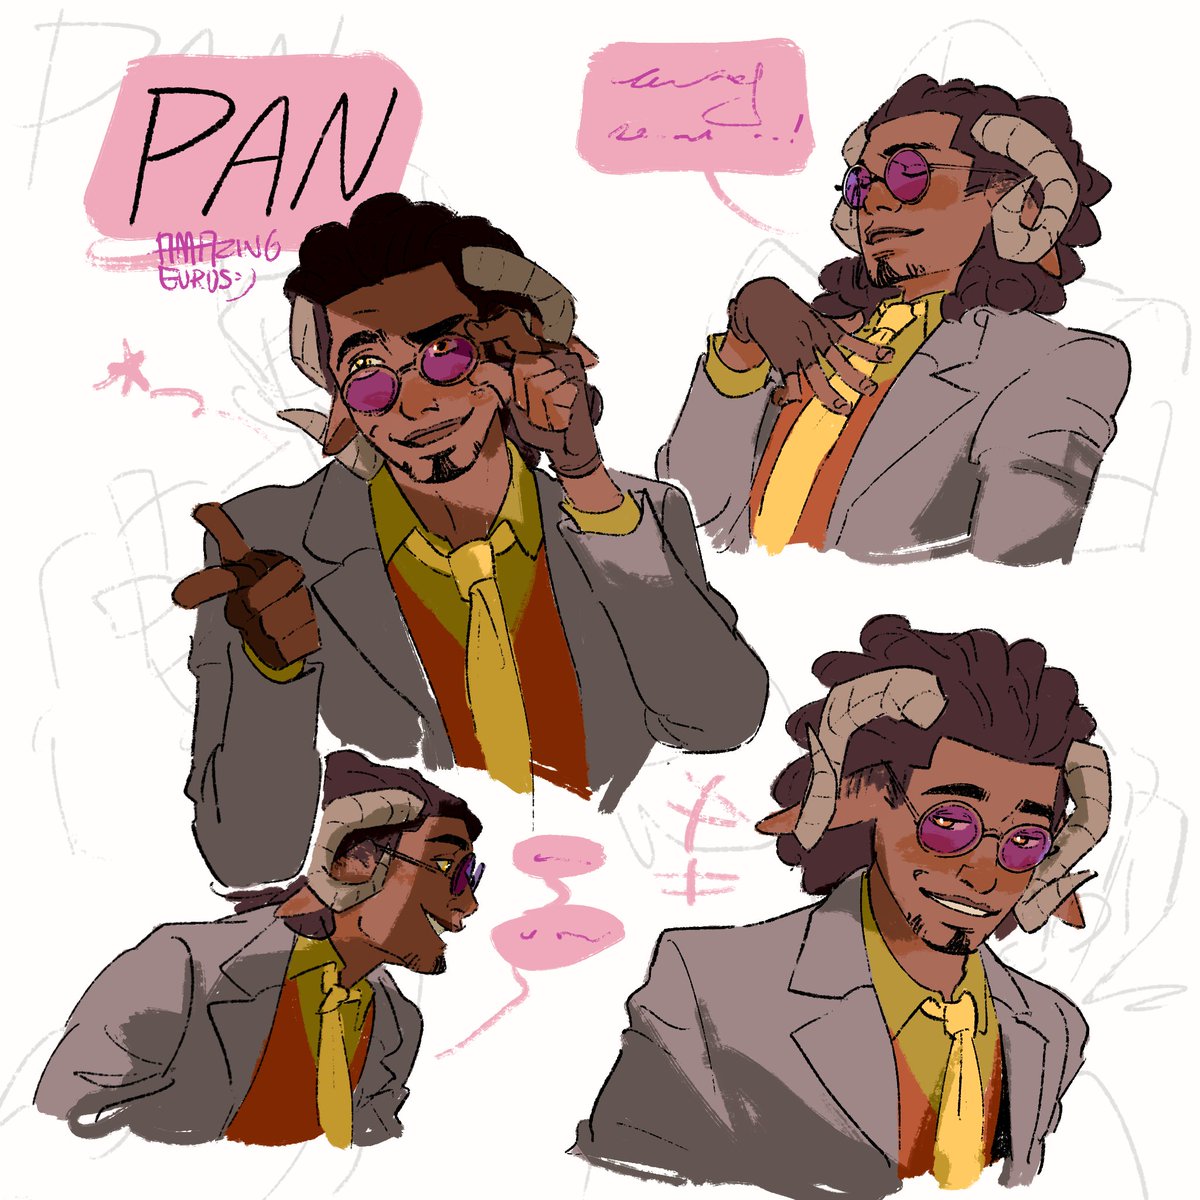 #straygods #pan hes a🦊🤲